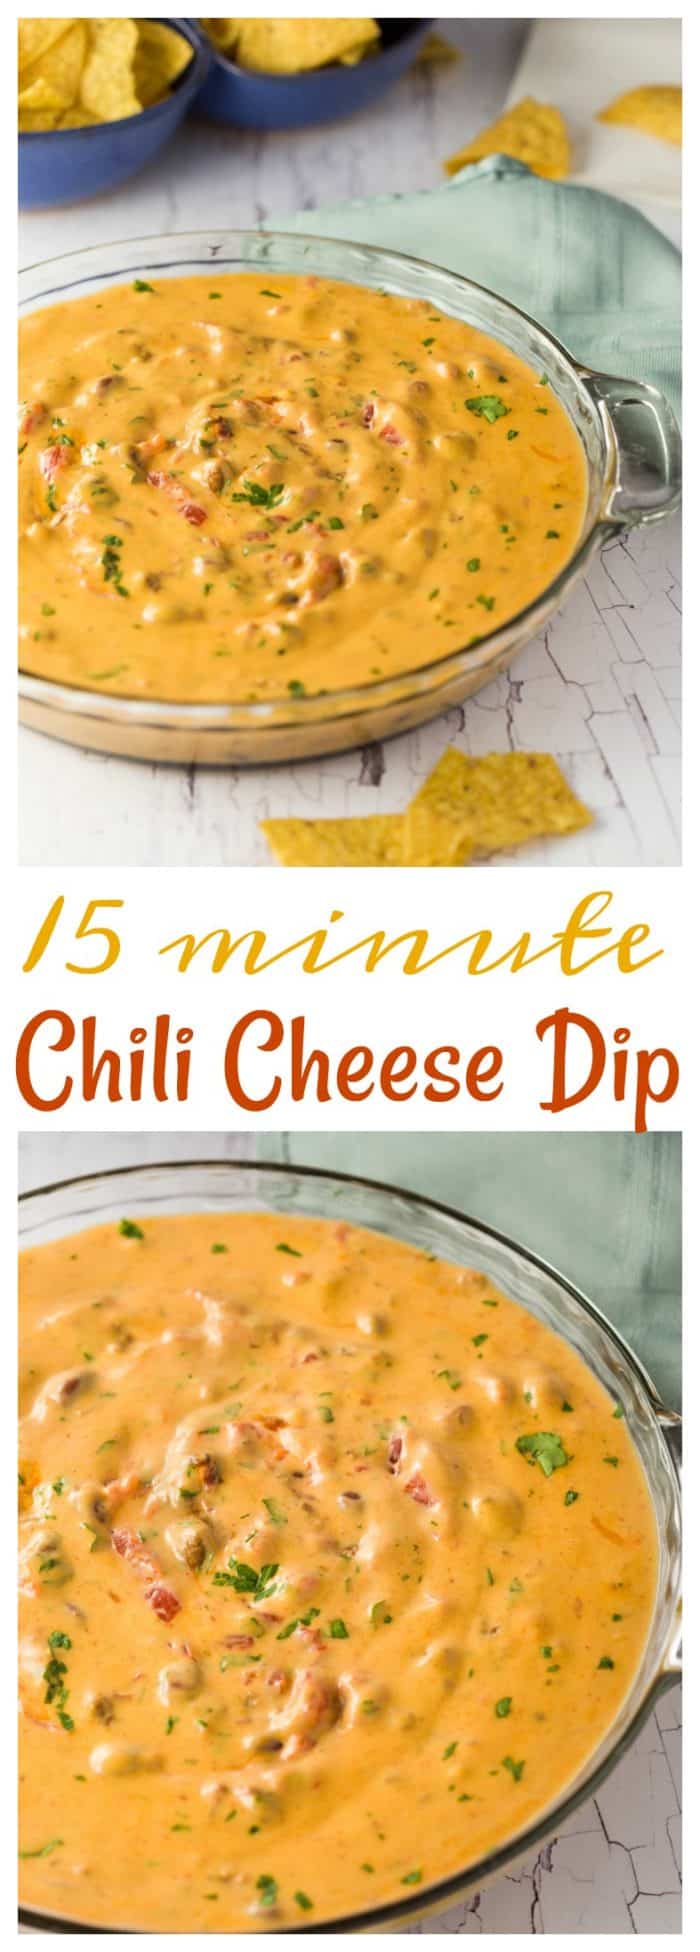 15 minute Chili Cheese Dip - The Cozy Cook